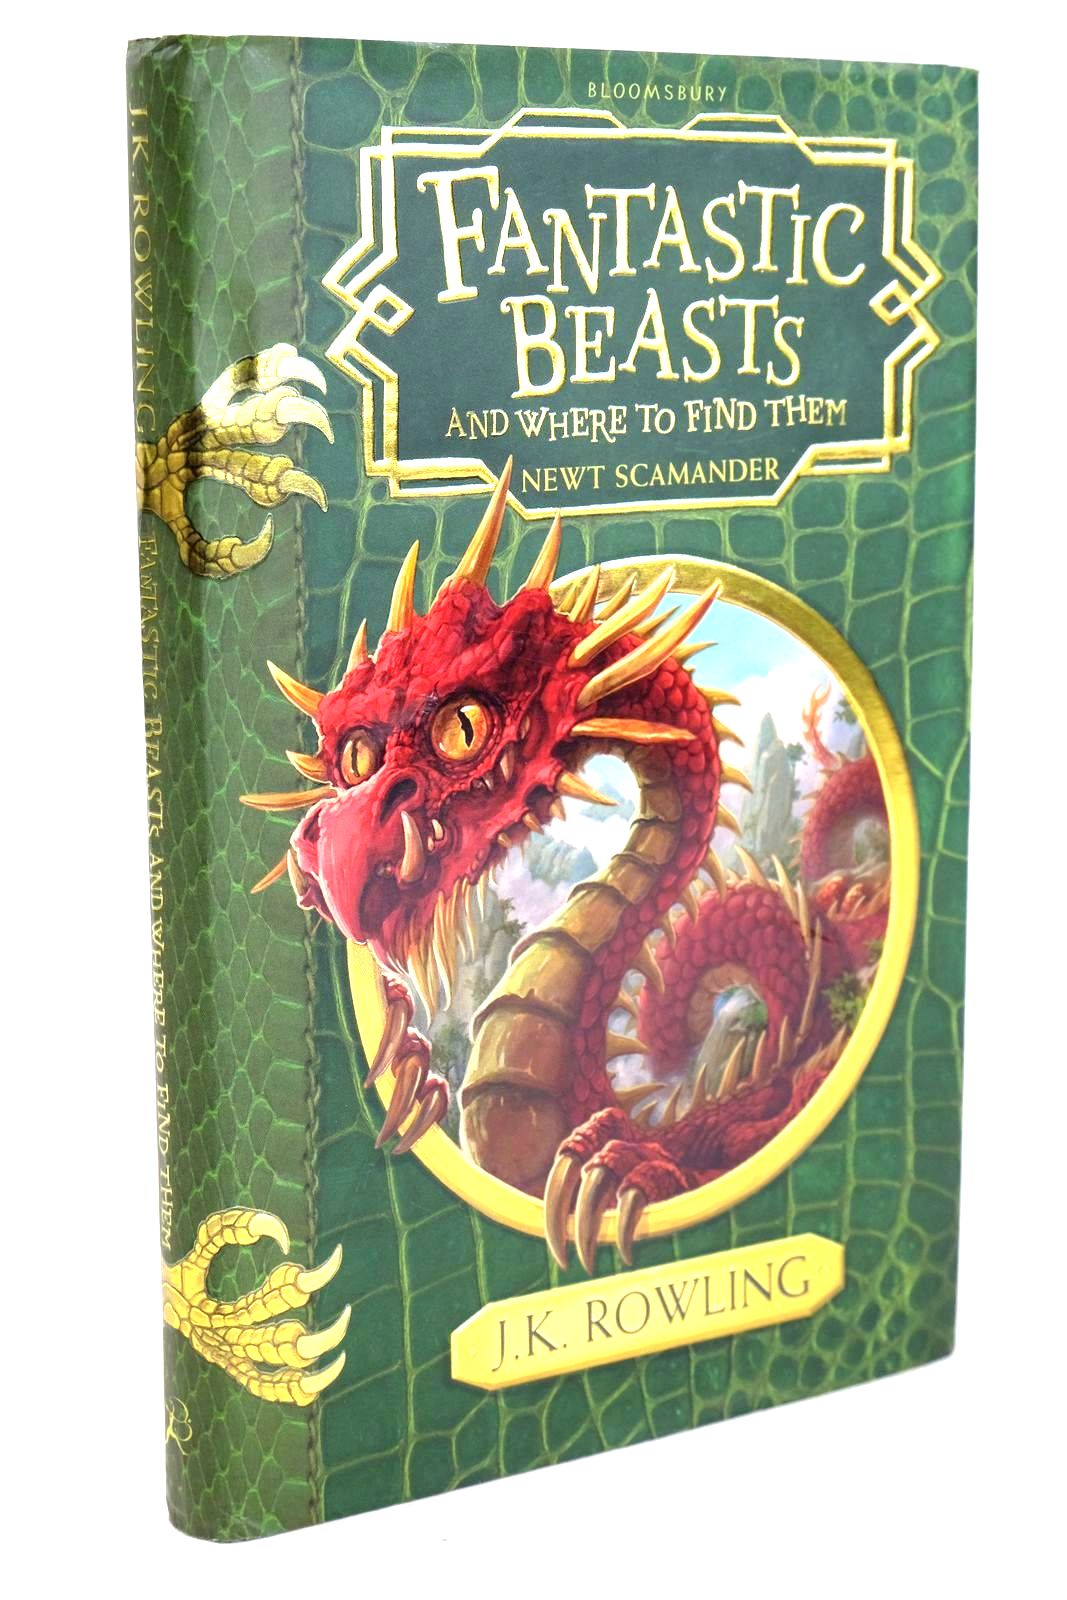 Photo of FANTASTIC BEASTS AND WHERE TO FIND THEM written by Rowling, J.K. illustrated by Duddle, Jonny Tomic, Tomislav published by Bloomsbury, Obscurus Books (STOCK CODE: 1326474)  for sale by Stella & Rose's Books